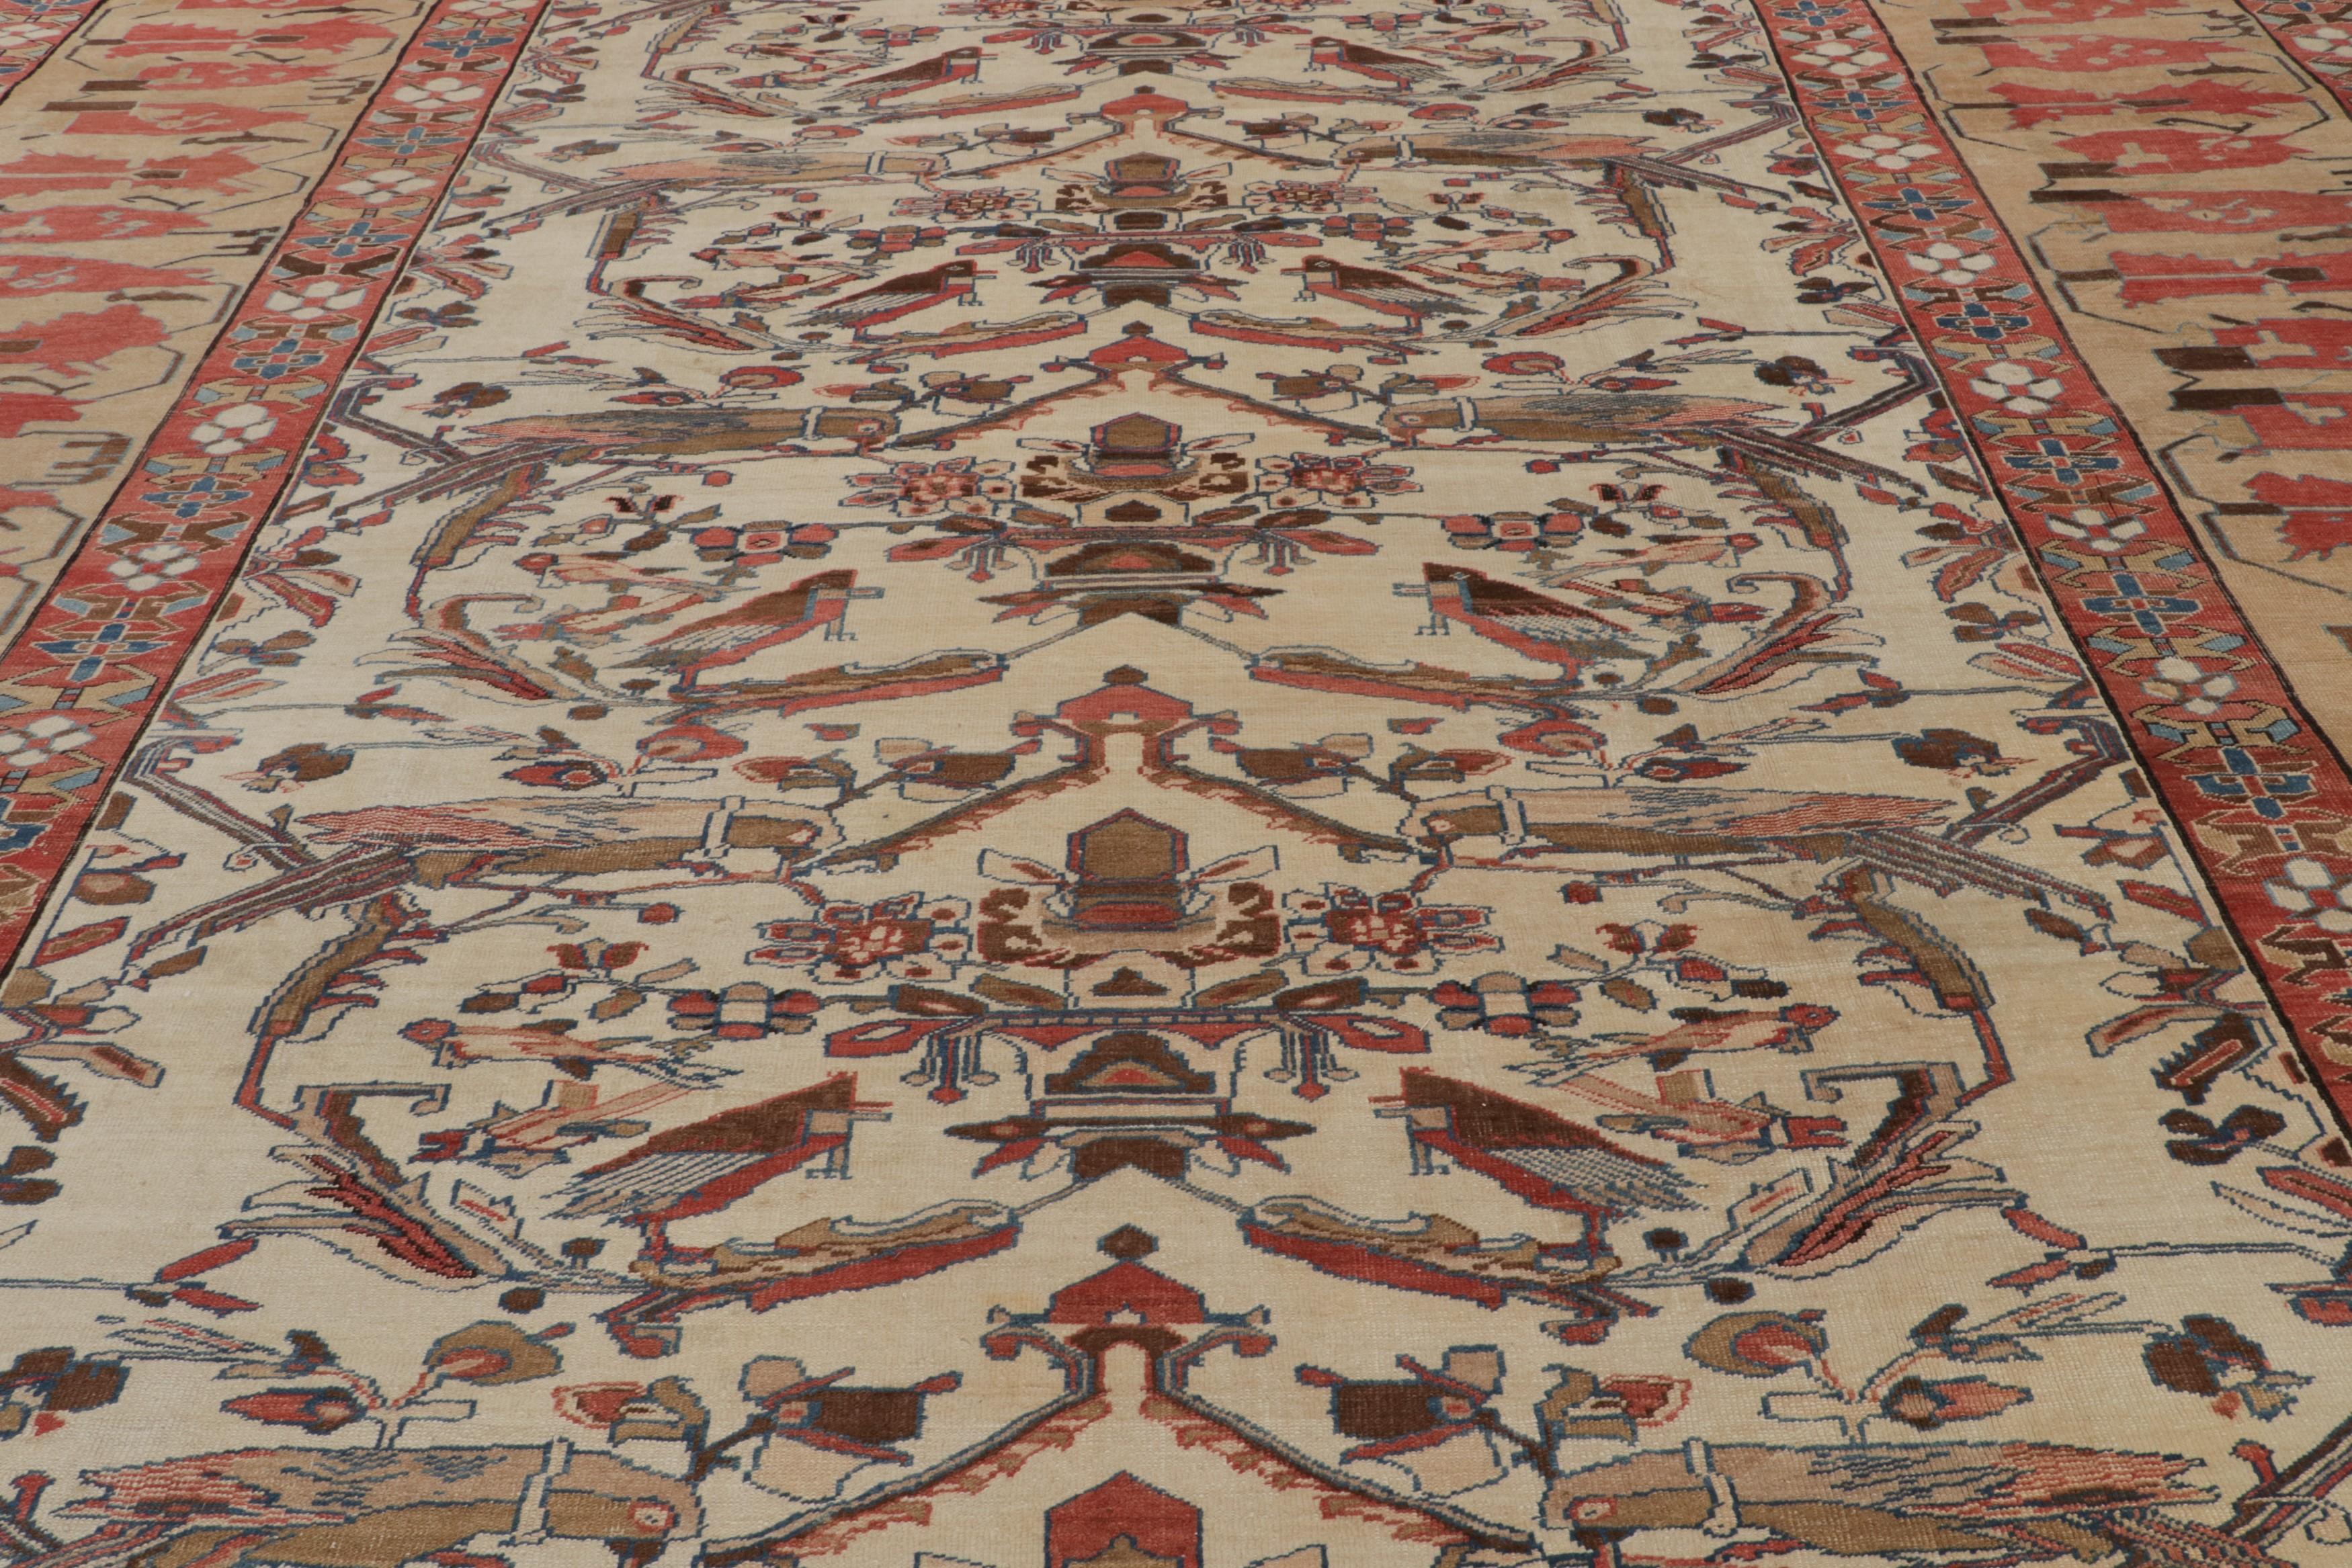 Hand-knotted in wool, an antique 13x18 oversized Bakshaish rug circa 1920-1930 - making a grand new entry to our antique selections.

On the Design:

This rug is rare in both size and pattern. Keen eyes will note beige-brown bird pictorials in the